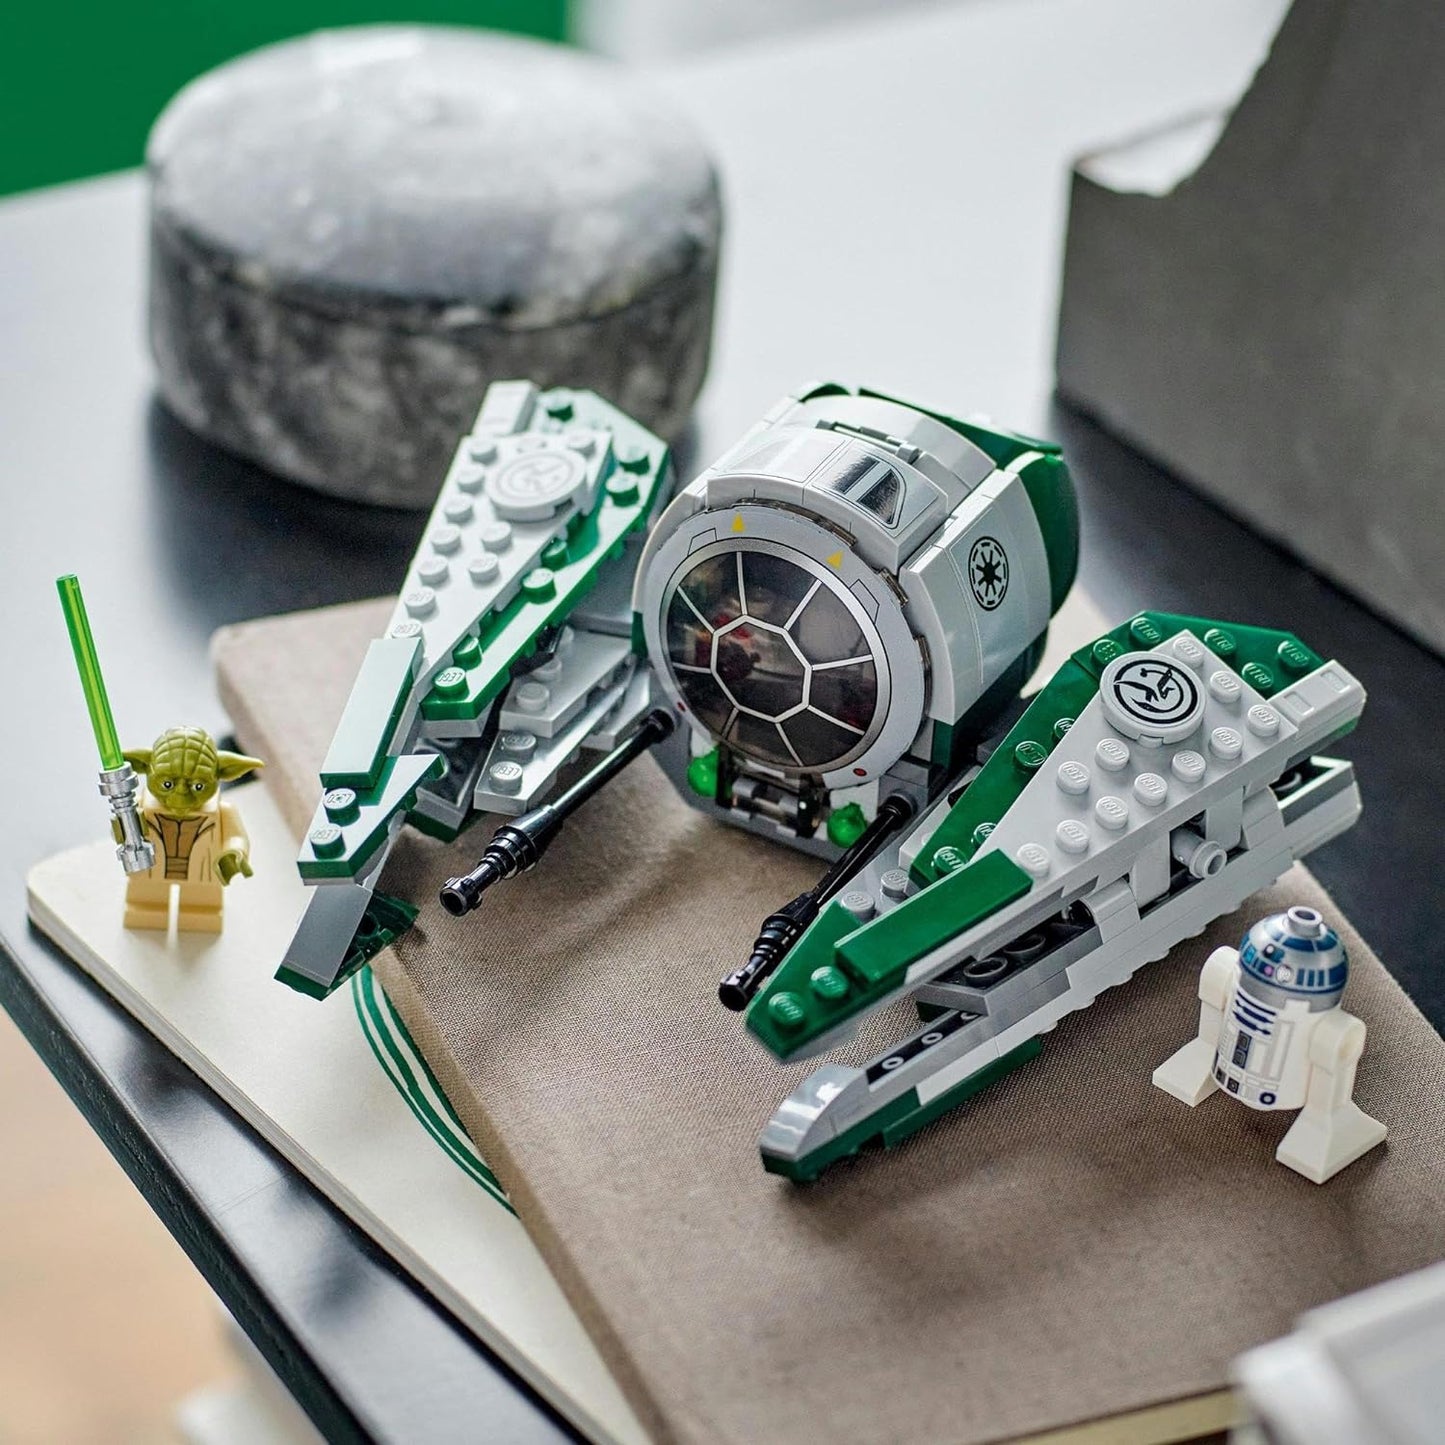 LEGO® Star Wars: The Clone Wars Yoda’s Jedi Starfighter™ 75360 Building Toy Set; Featuring 2 Iconic Characters